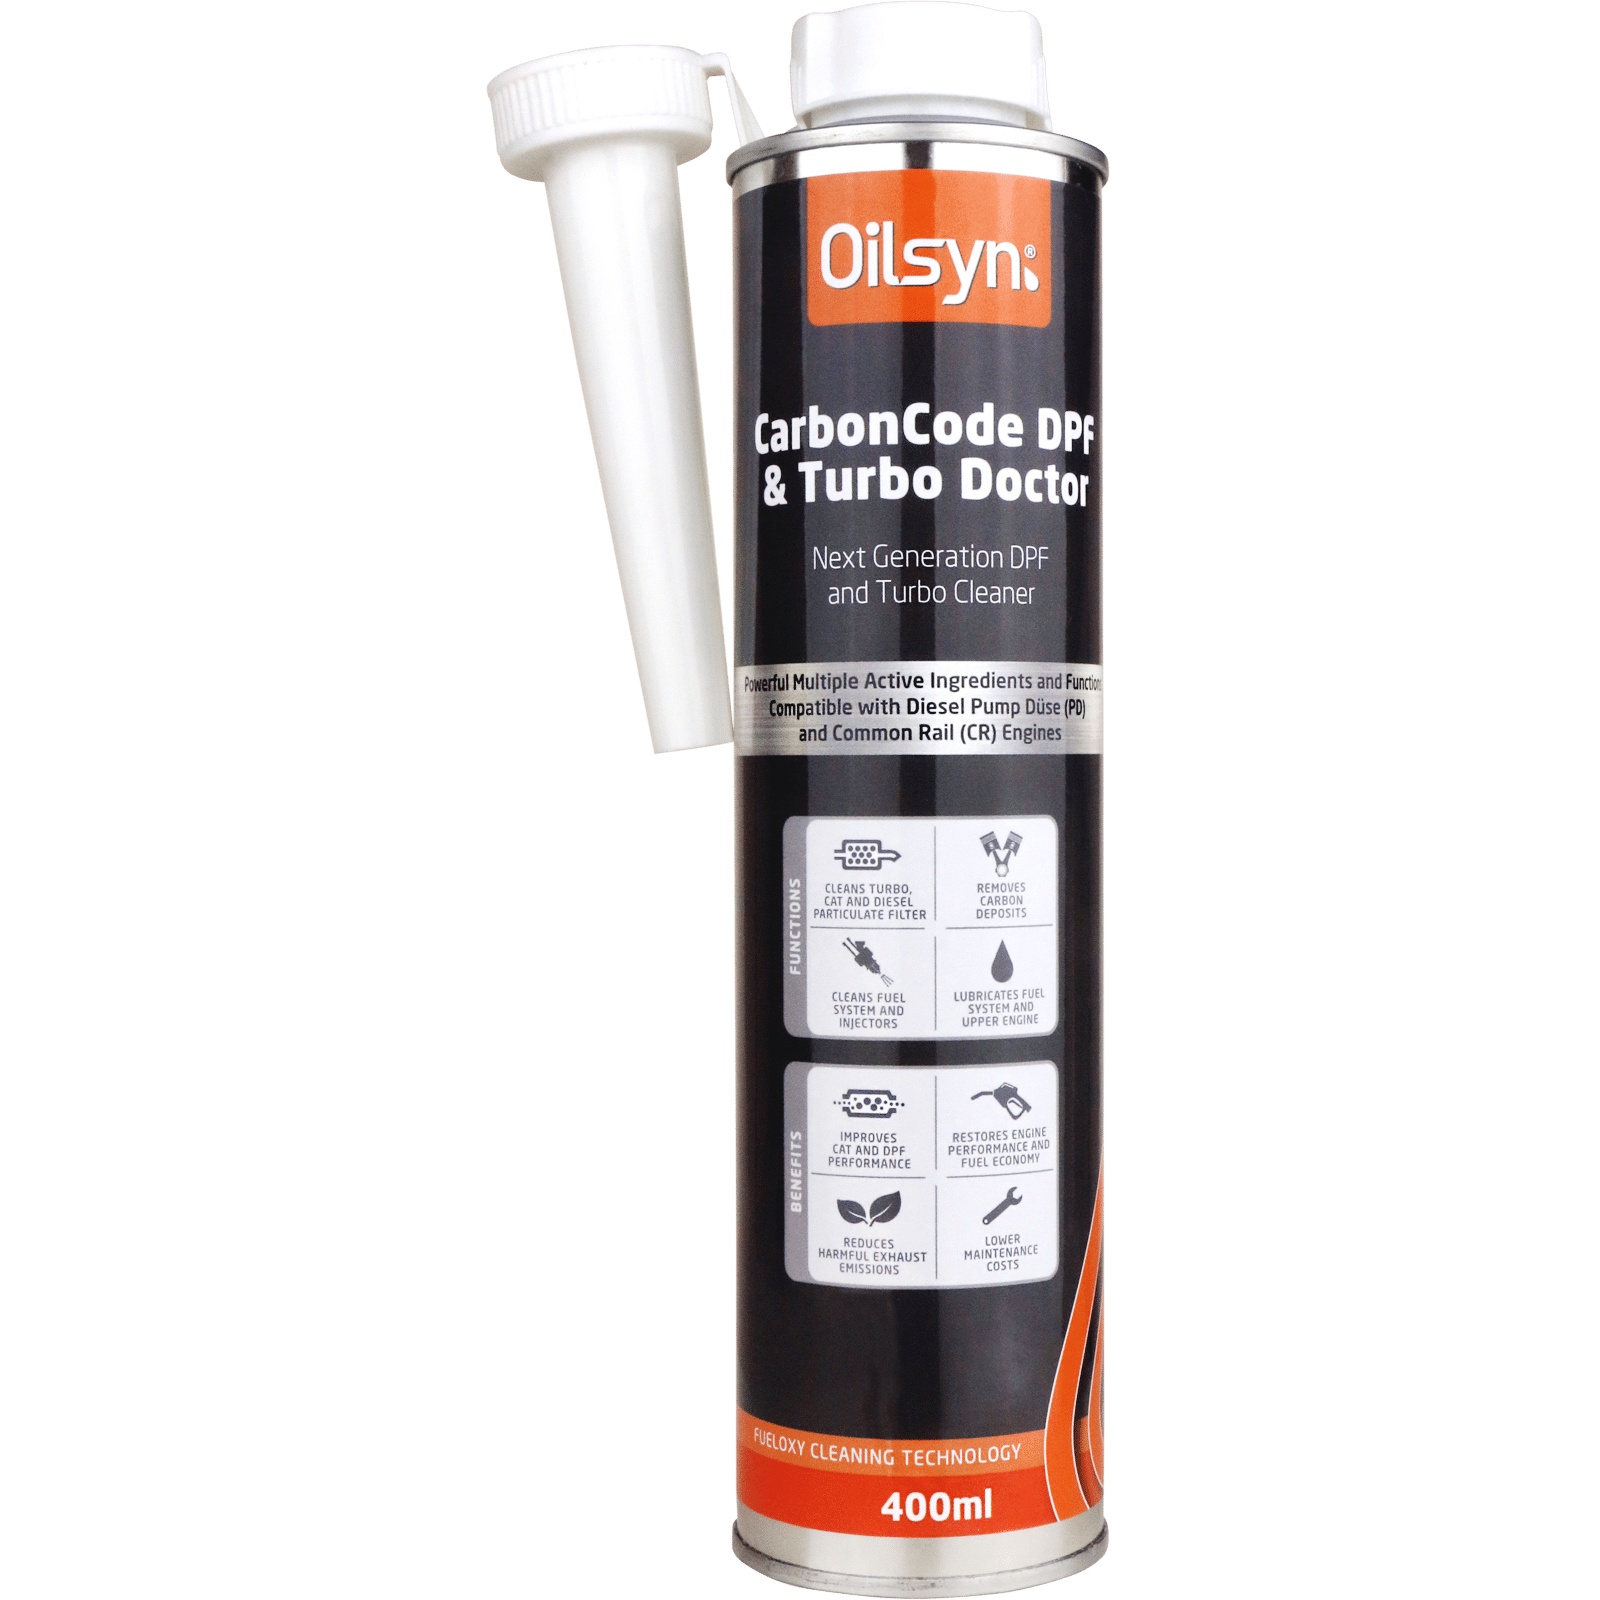 Oilsyn CarbonCode DPF Turbo Doctor 400ml